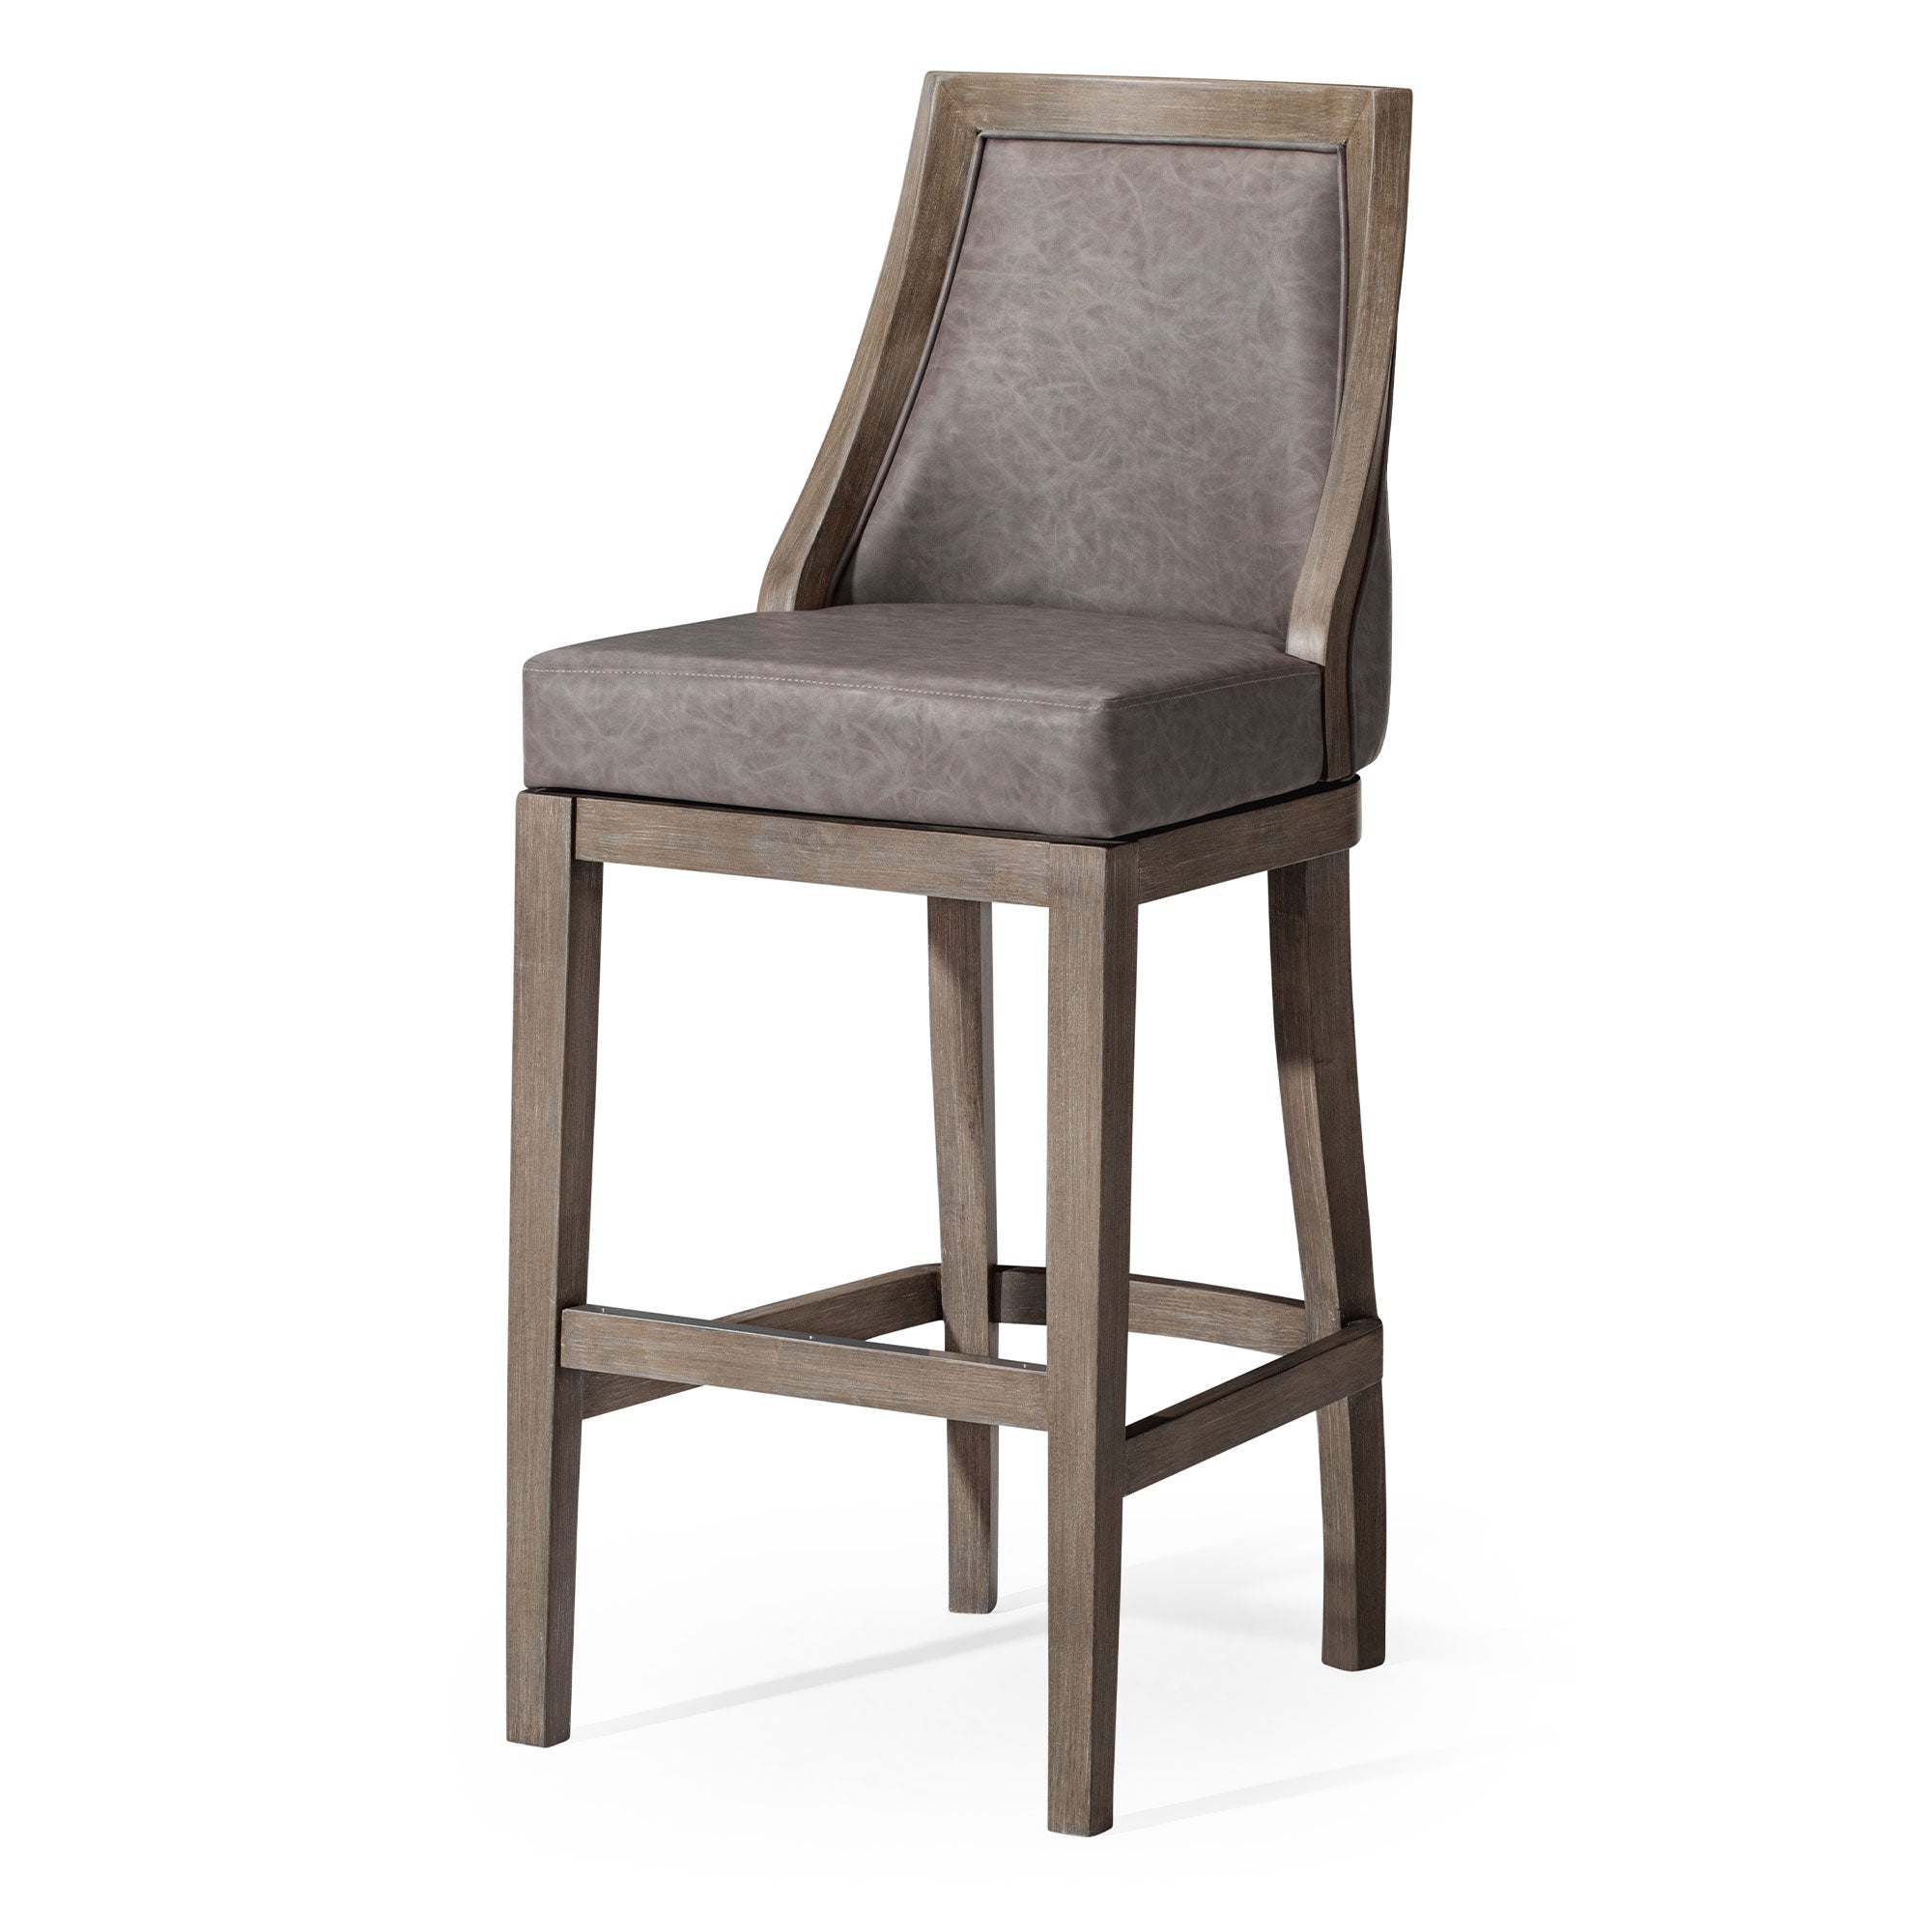 Vienna Bar Stool in Reclaimed Oak Finish with Ronan Stone Vegan Leather in Stools by Maven Lane